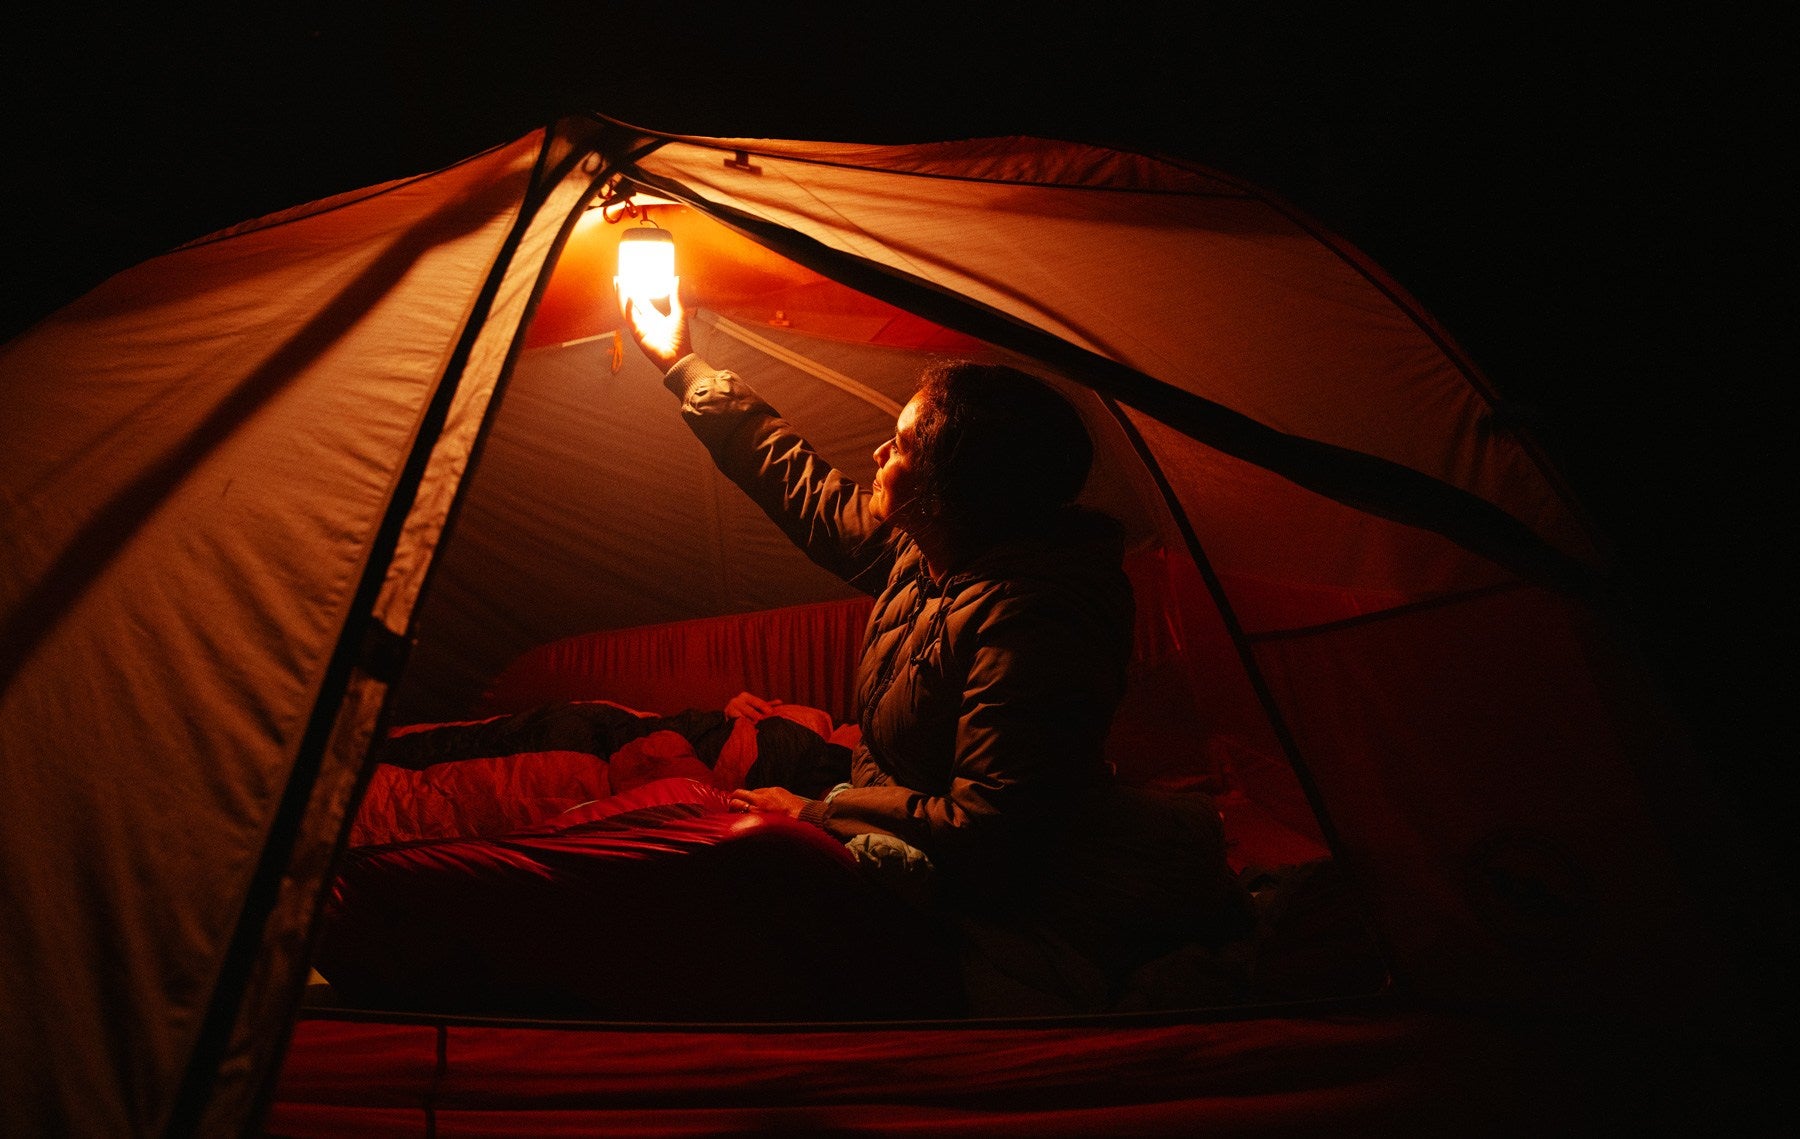 Fun camping lighting ideas you will love - Learning Escapes